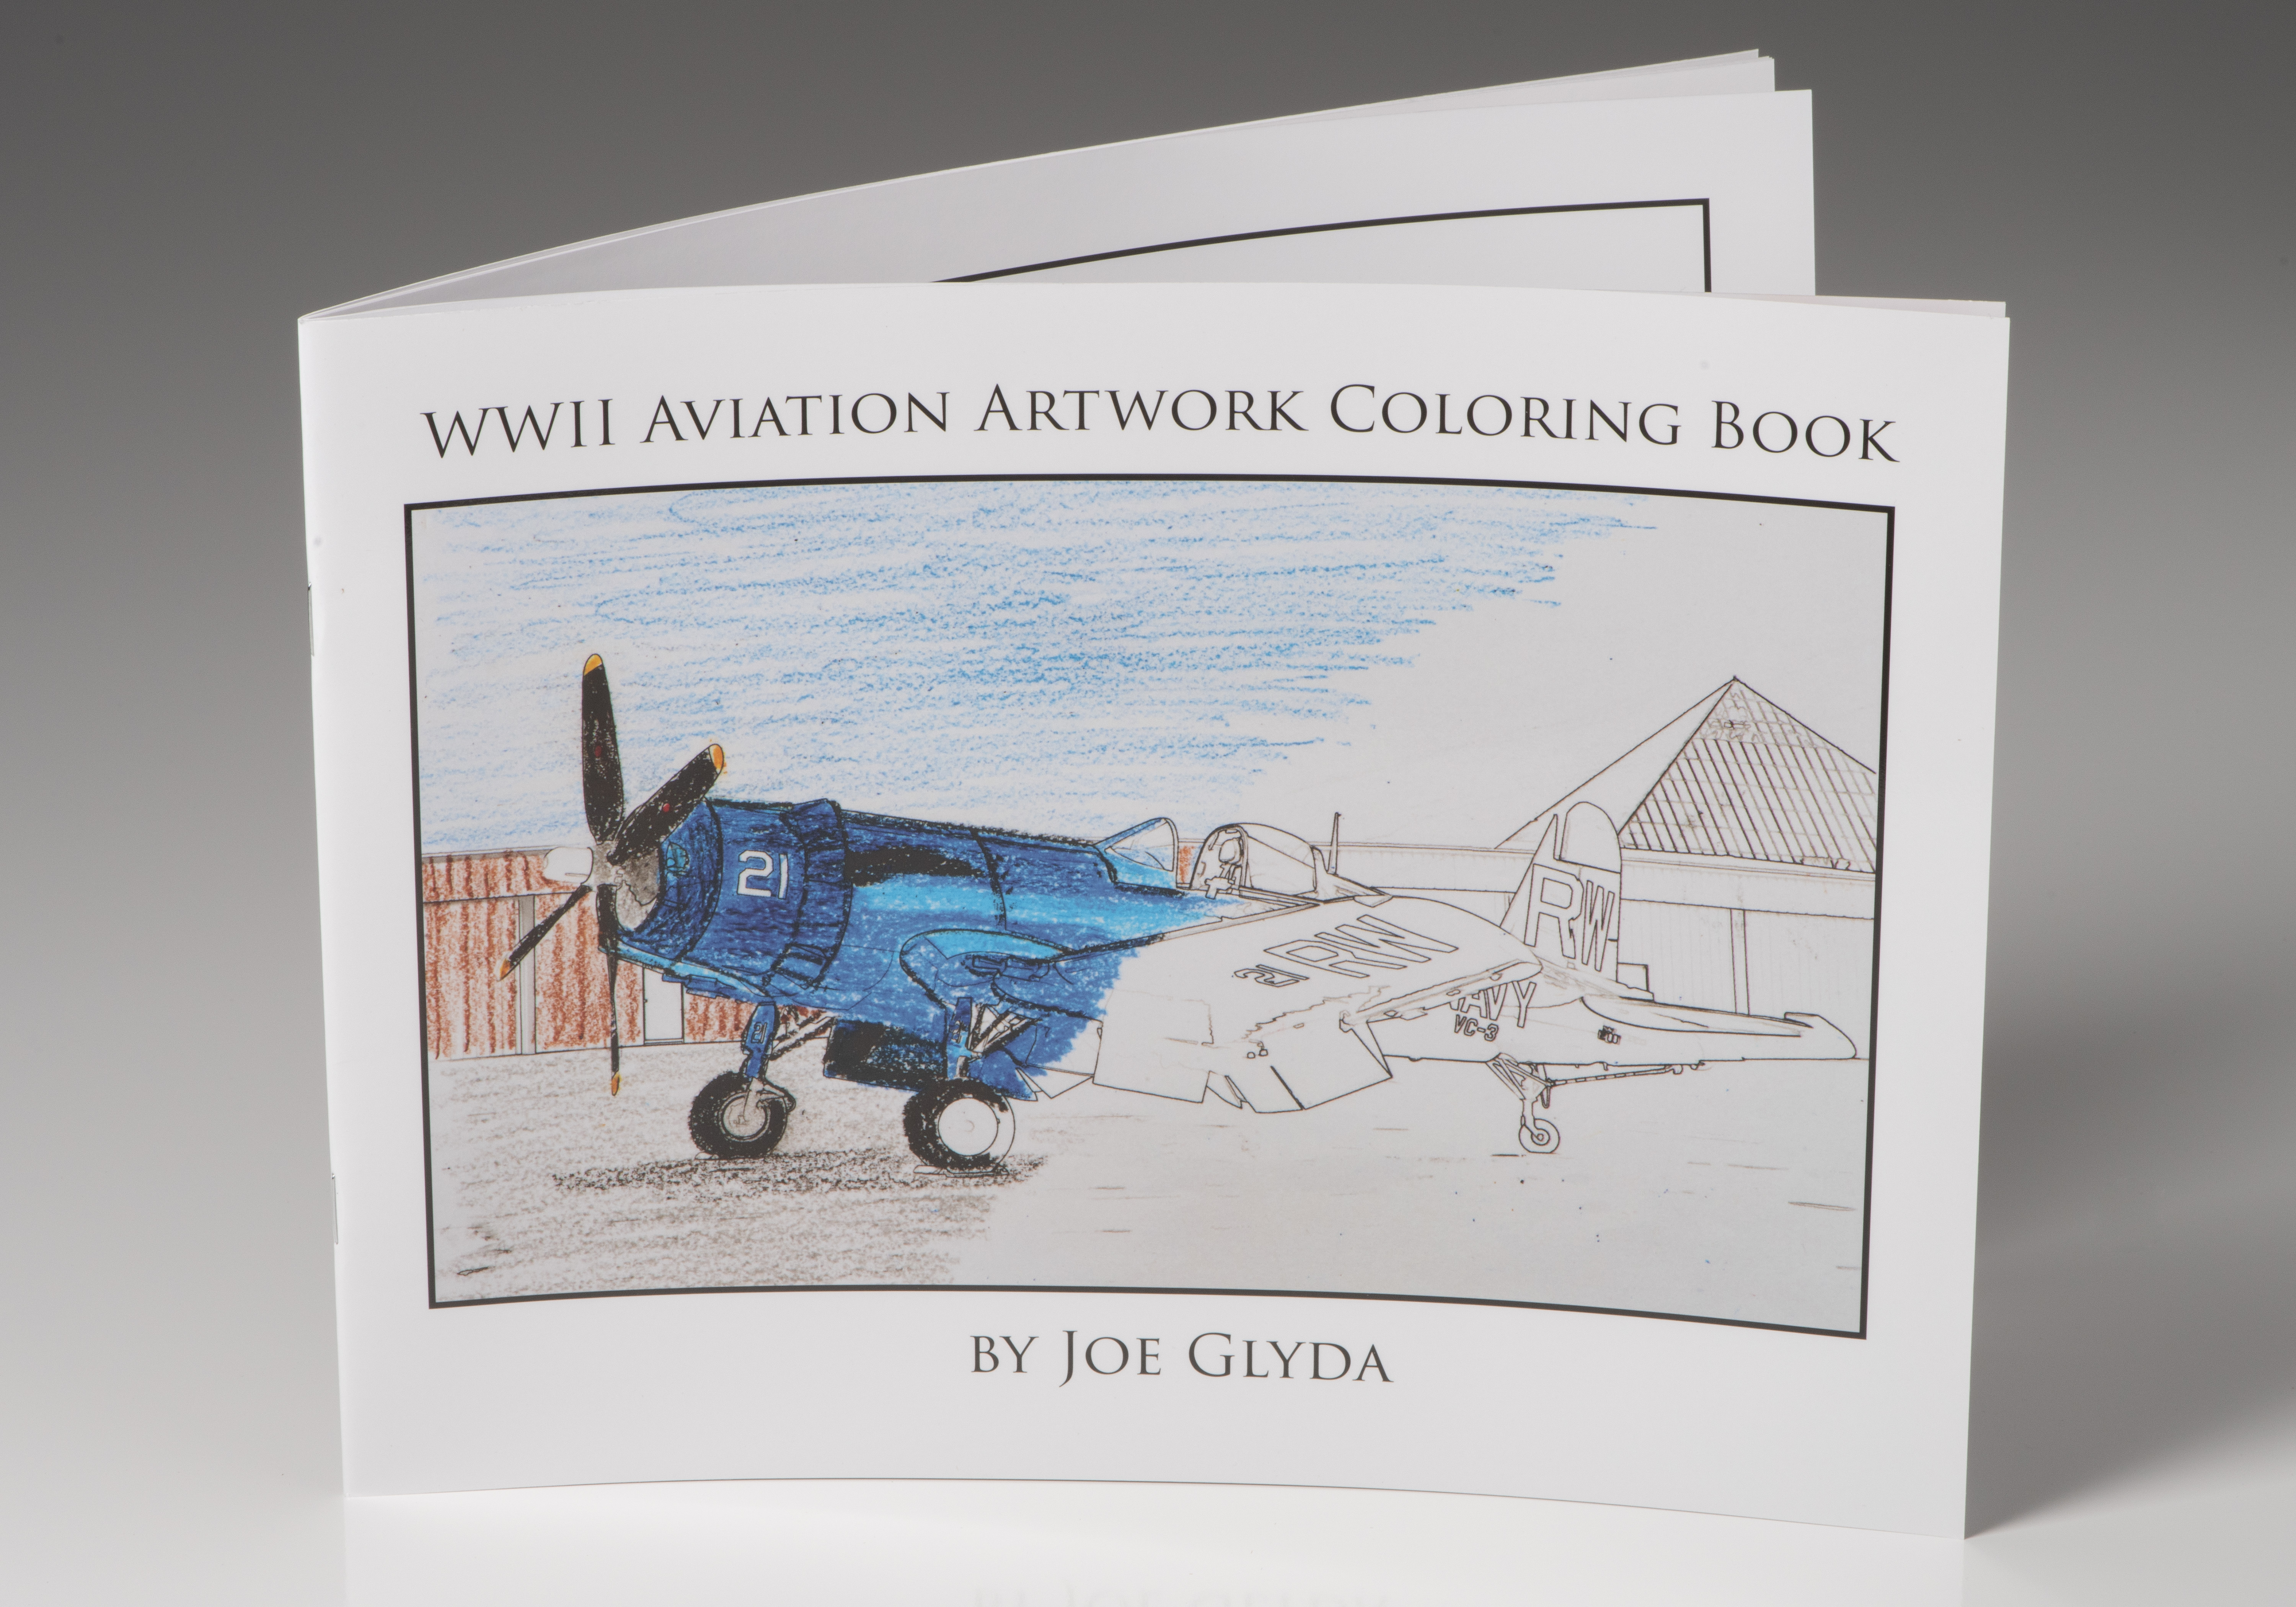 WWII Aviation Artwork Coloring Book